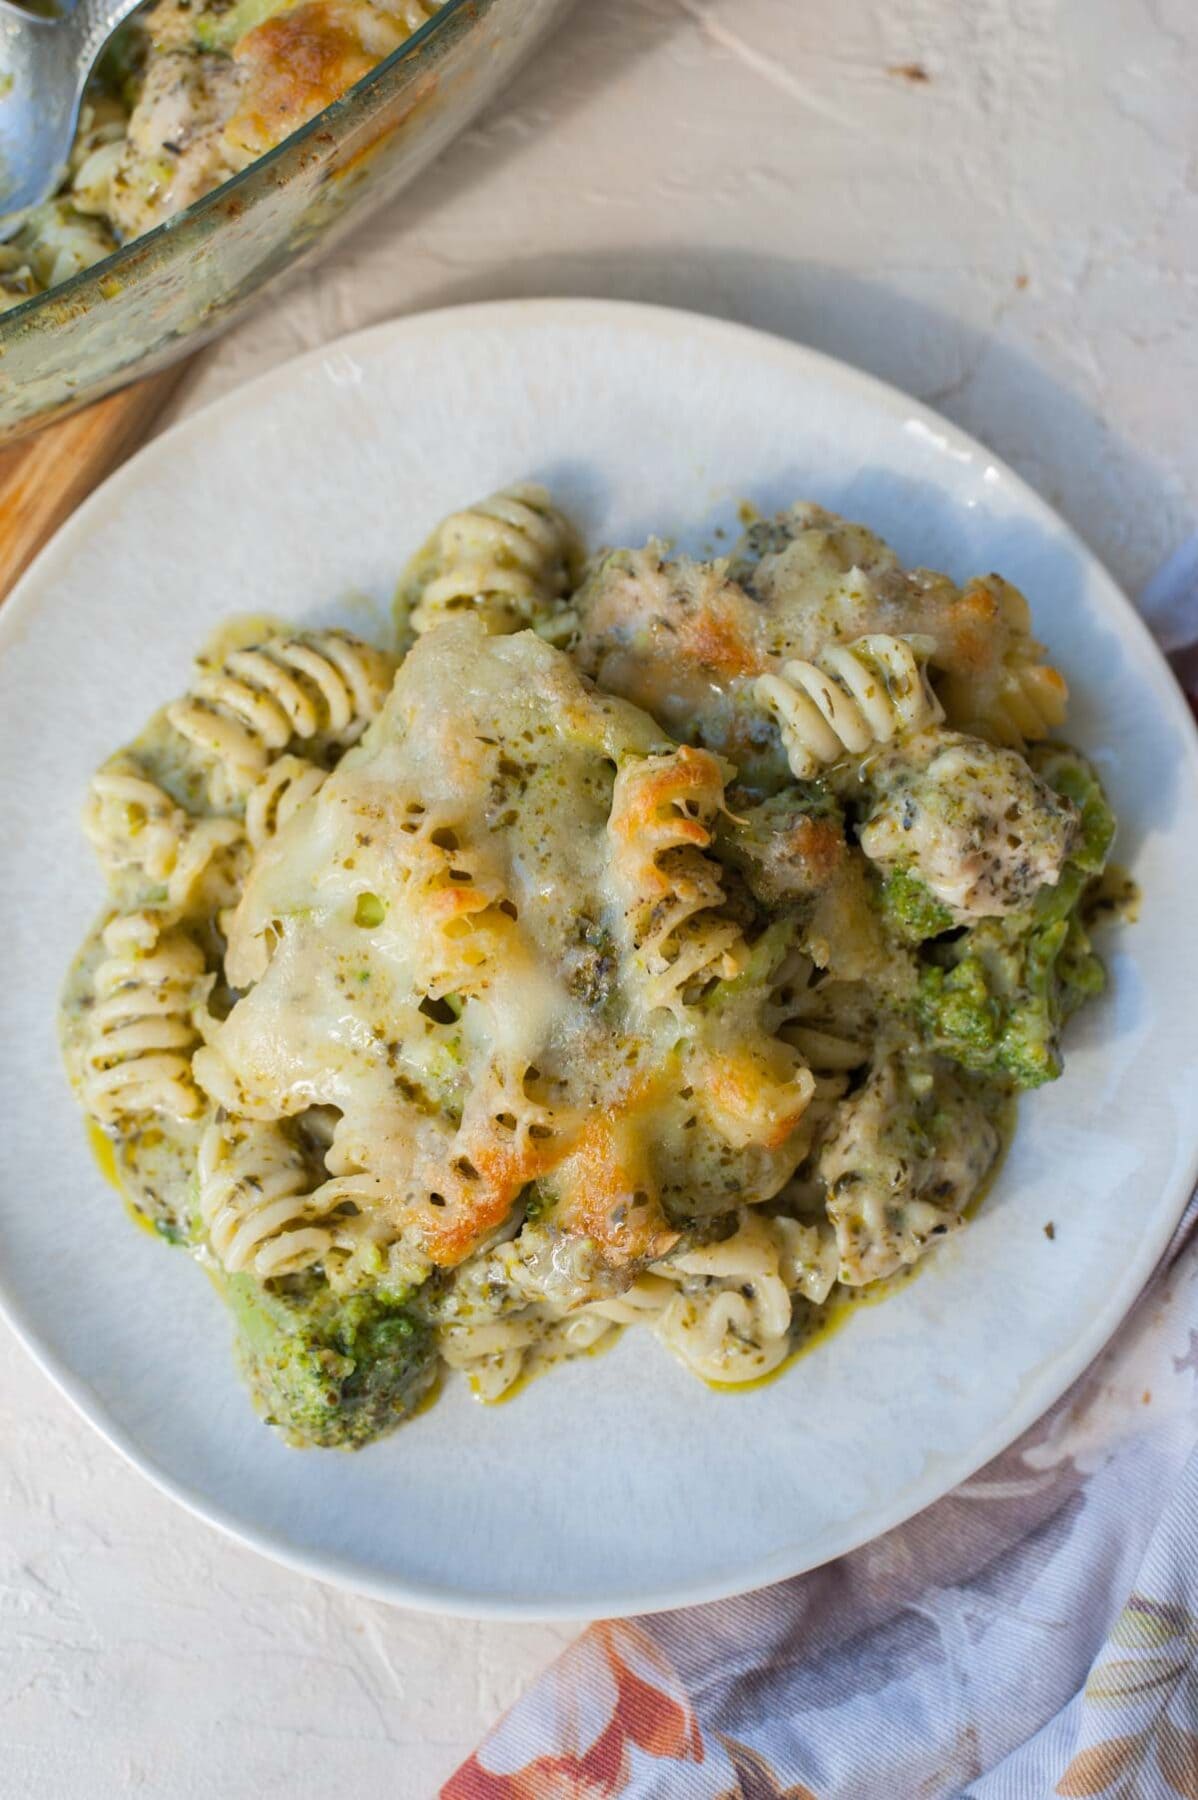 A serving of pesto pasta chicken bake on a white plate.